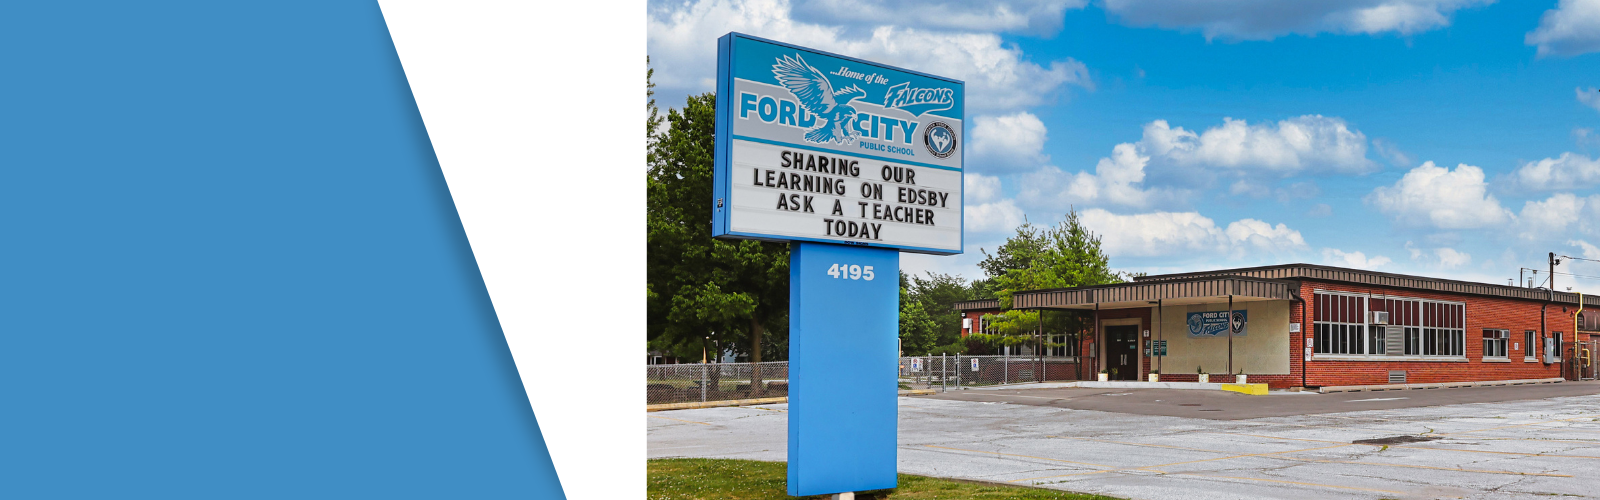 Ford City sign